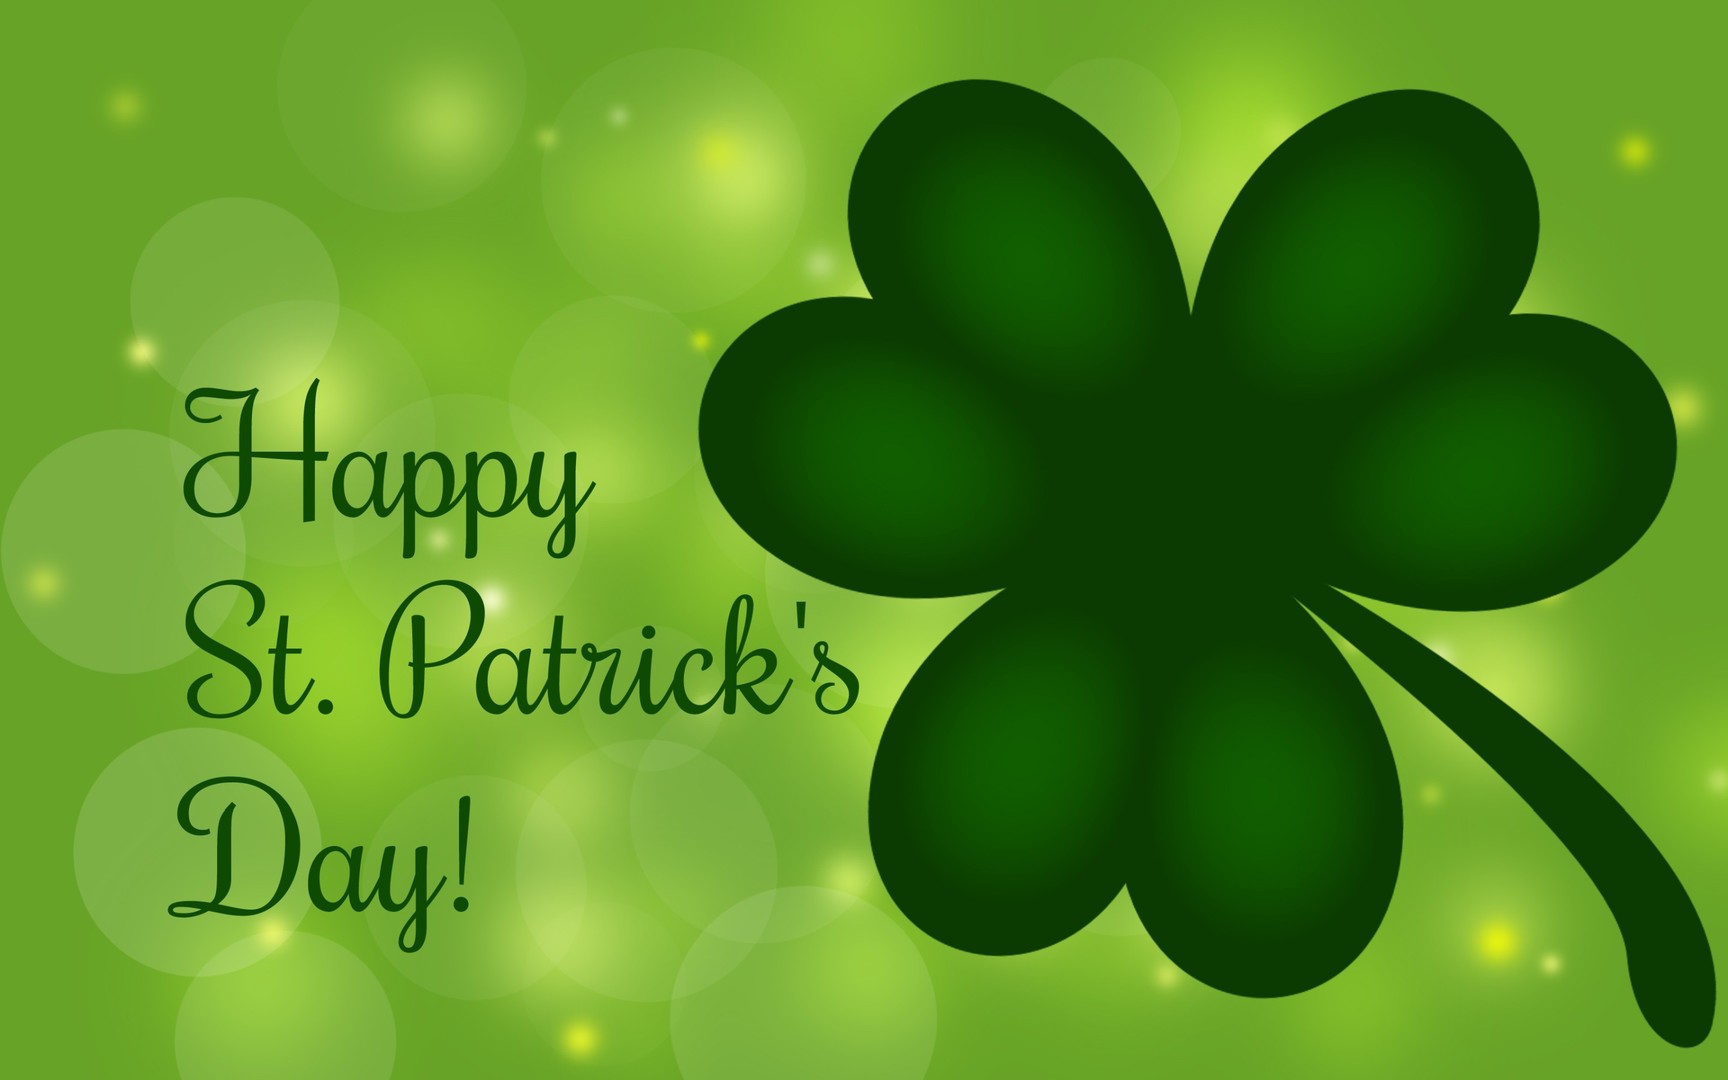 Happy St Patricks Day Image Quotes Wishes Messages